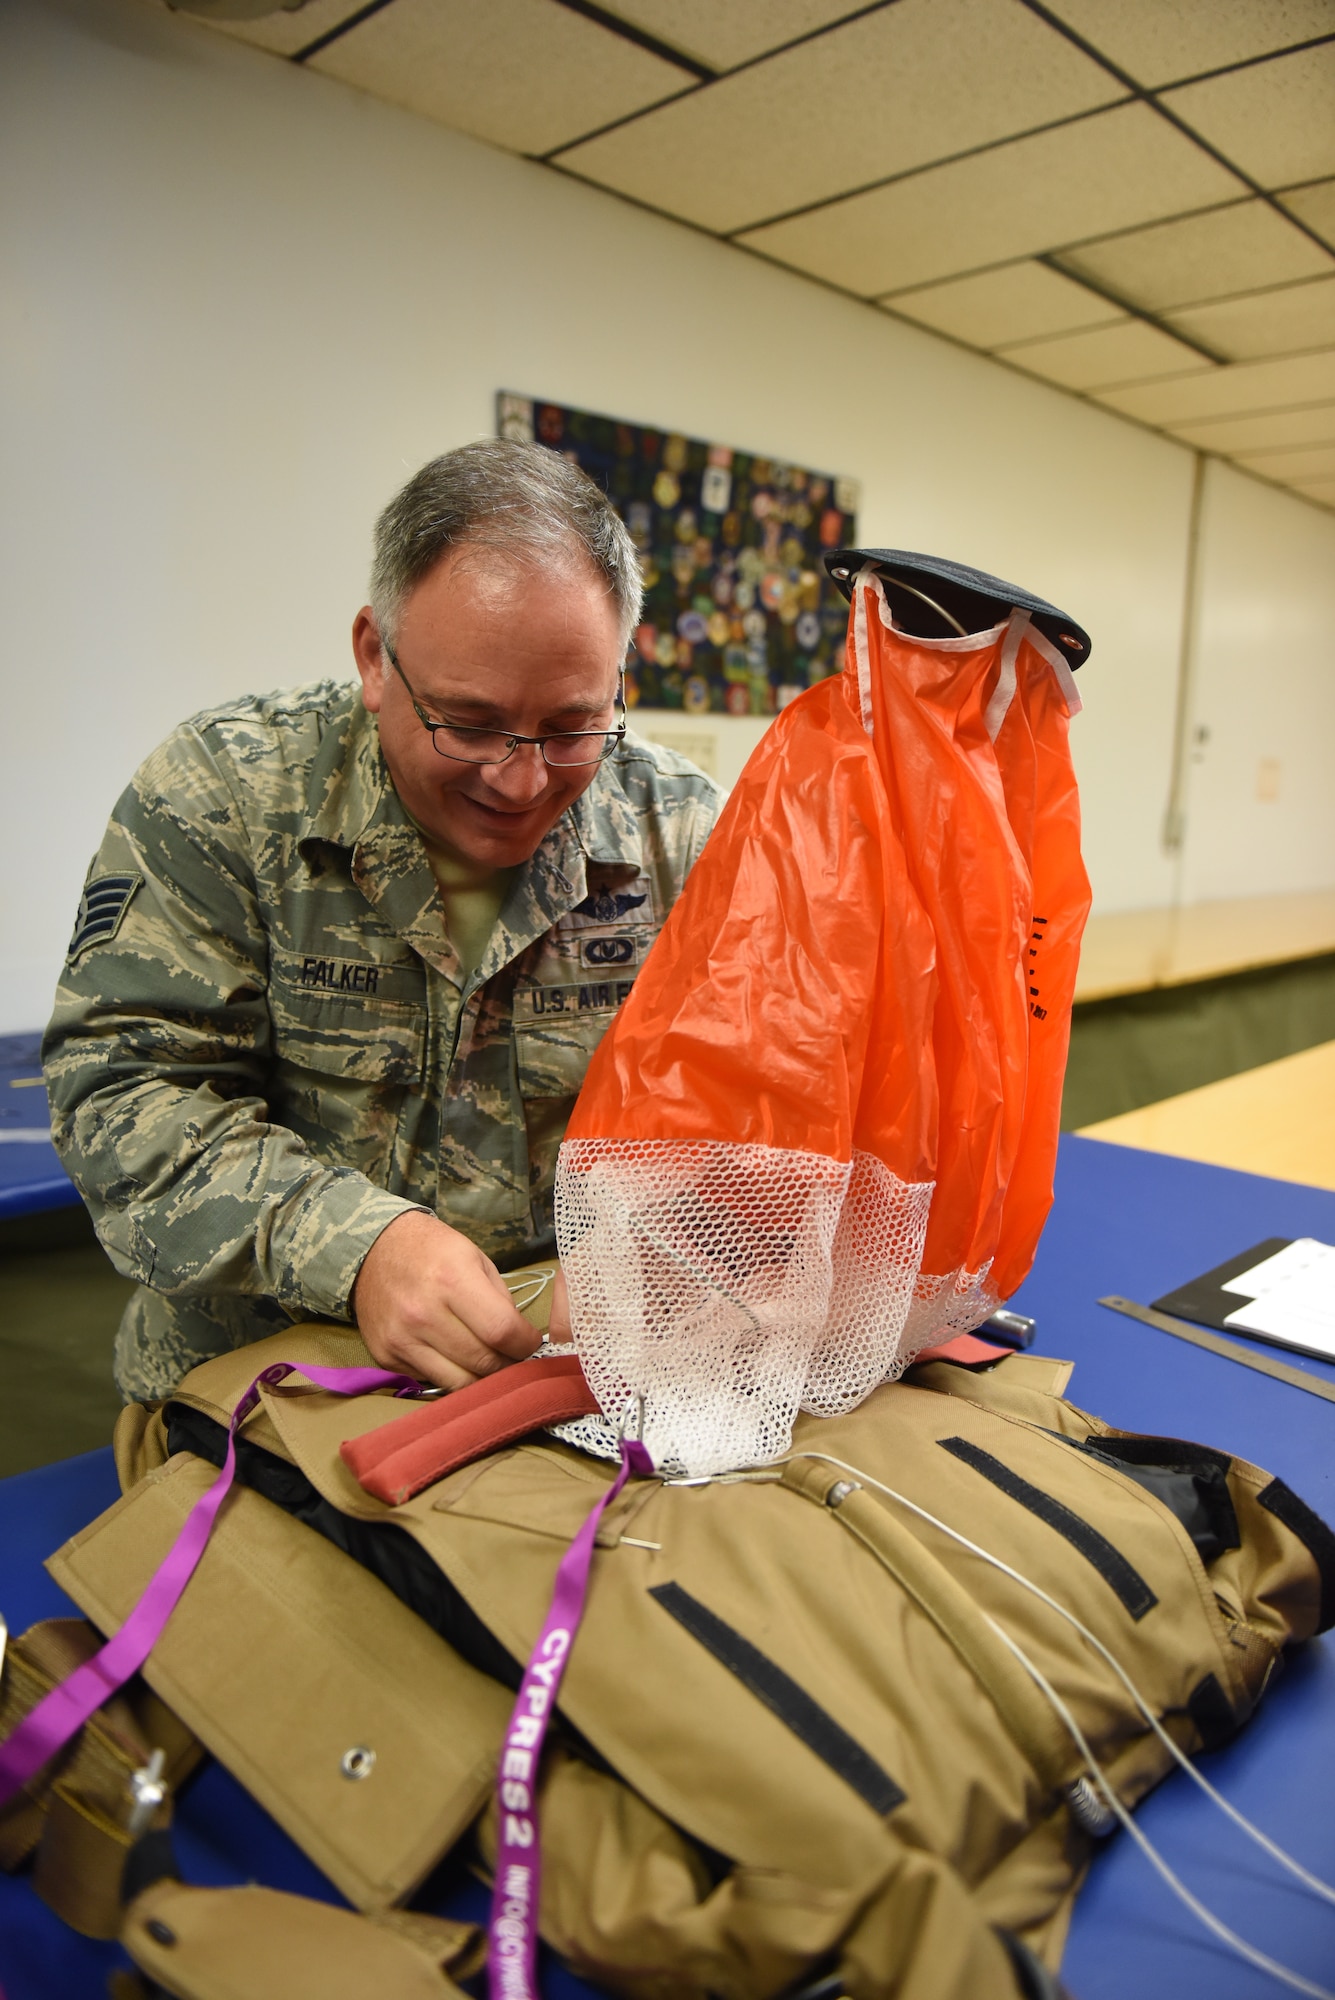 Staff Sgt. Stephen Falker, an aircrew flight equipment technicians with the 193rd Special Operations Support Squadron, Middletown, Pennsylvania, Pennsylvania Air National Guard, builds a Low-Profile Parachute from scratch Aug. 9, 2018. The new parachutes replaced the old ones, which were originally constructed in the 1980’s. (U.S. Air National Guard photo by Senior Airman Julia Sorber/Released)